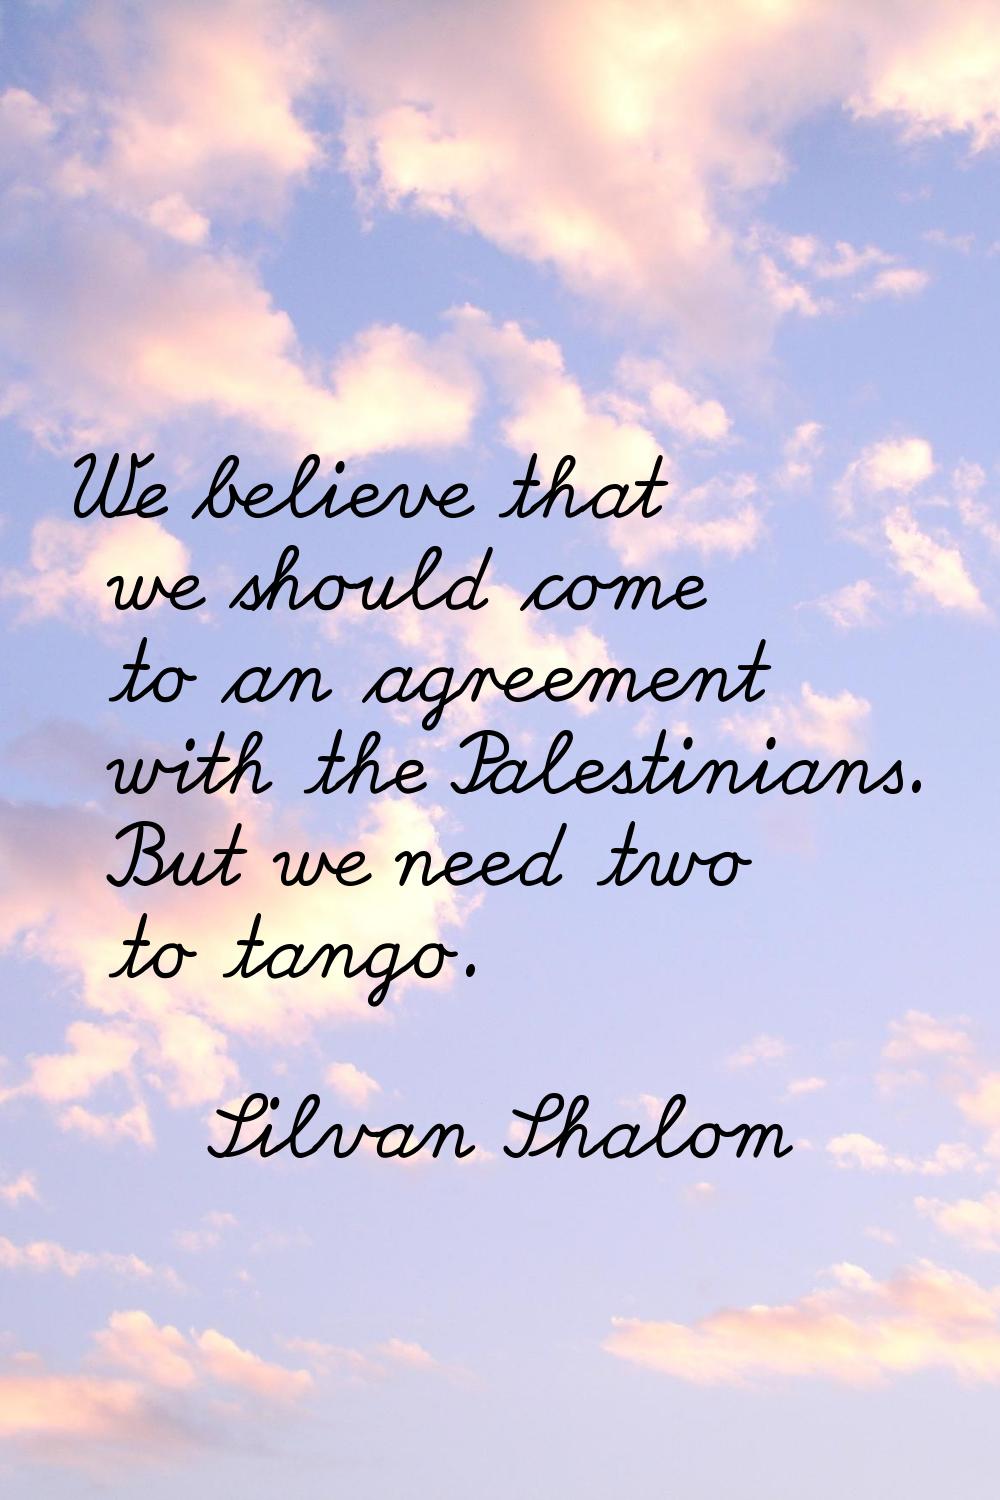 We believe that we should come to an agreement with the Palestinians. But we need two to tango.